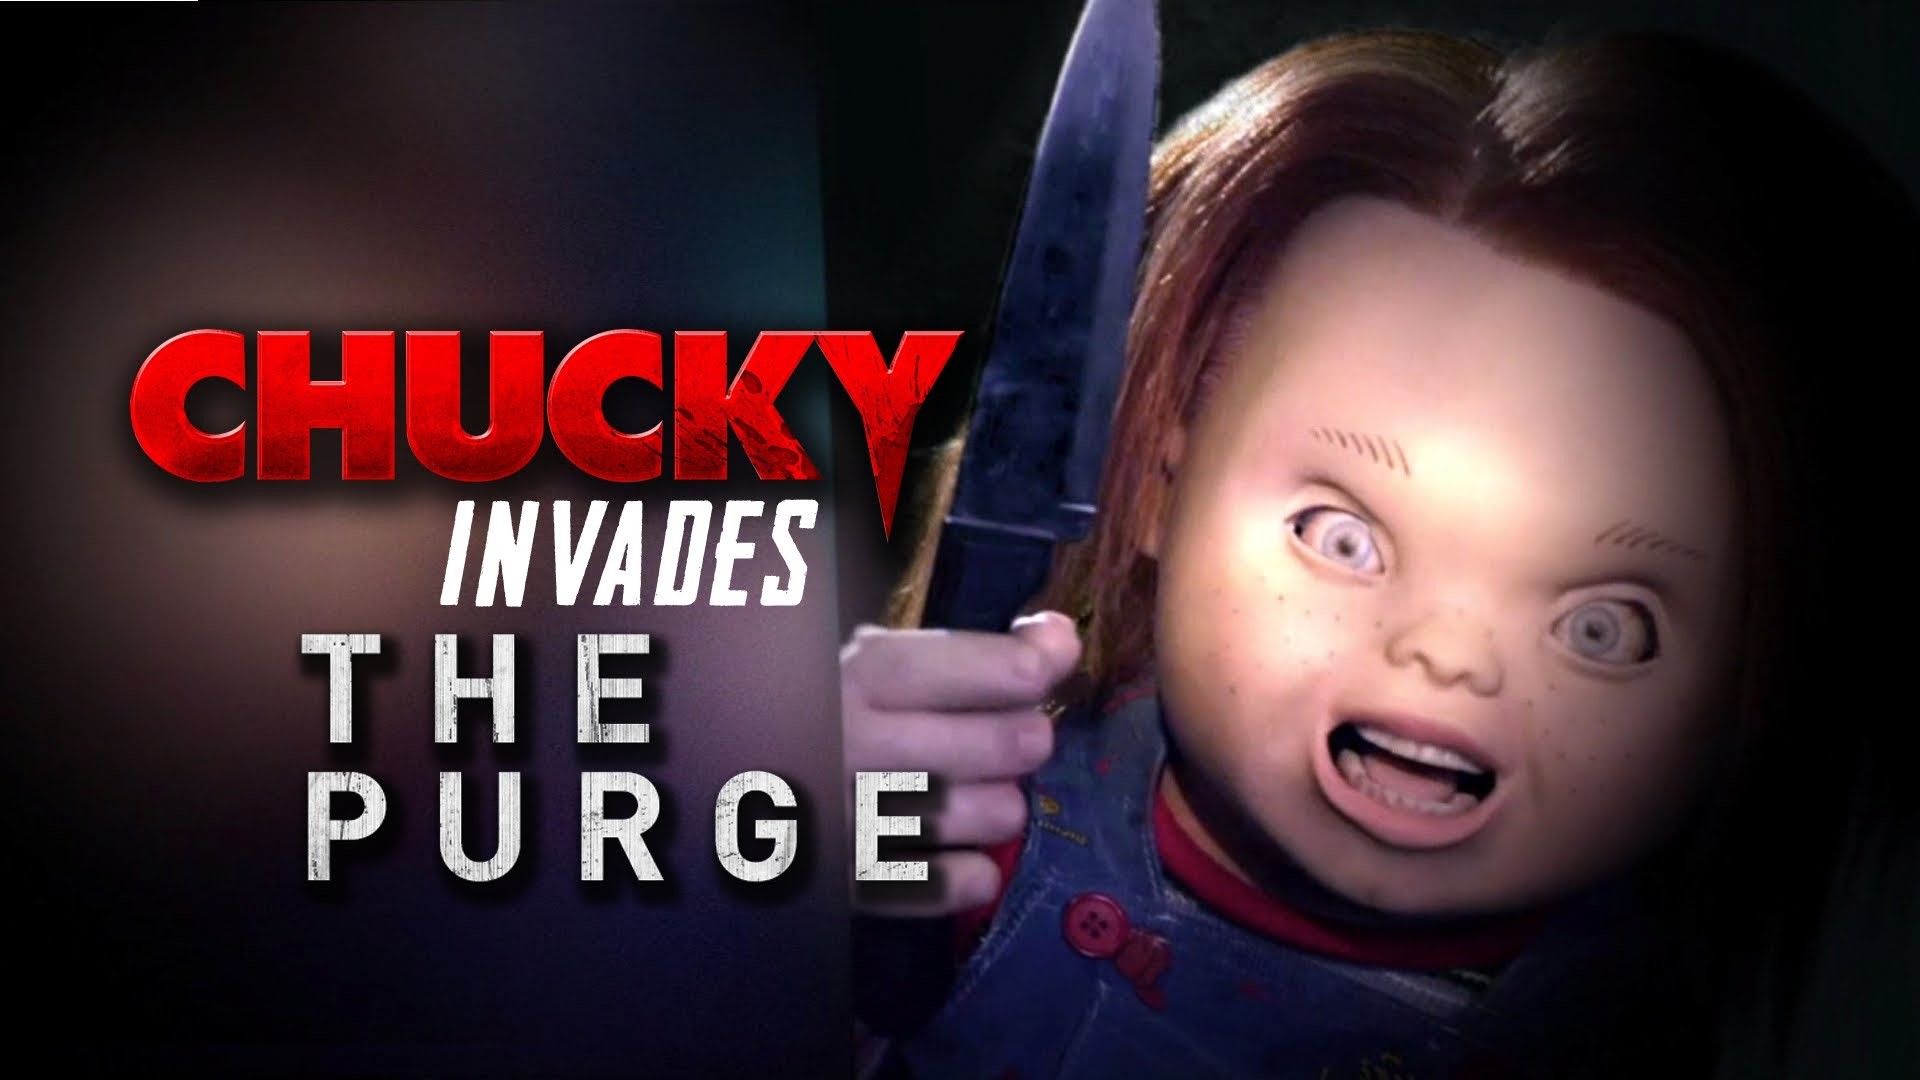 1920x1080 Video - Chucky Invades The Purge - Horror Movie MashUp (2013) Film HD |  Child's Play Wiki | FANDOM powered by Wikia